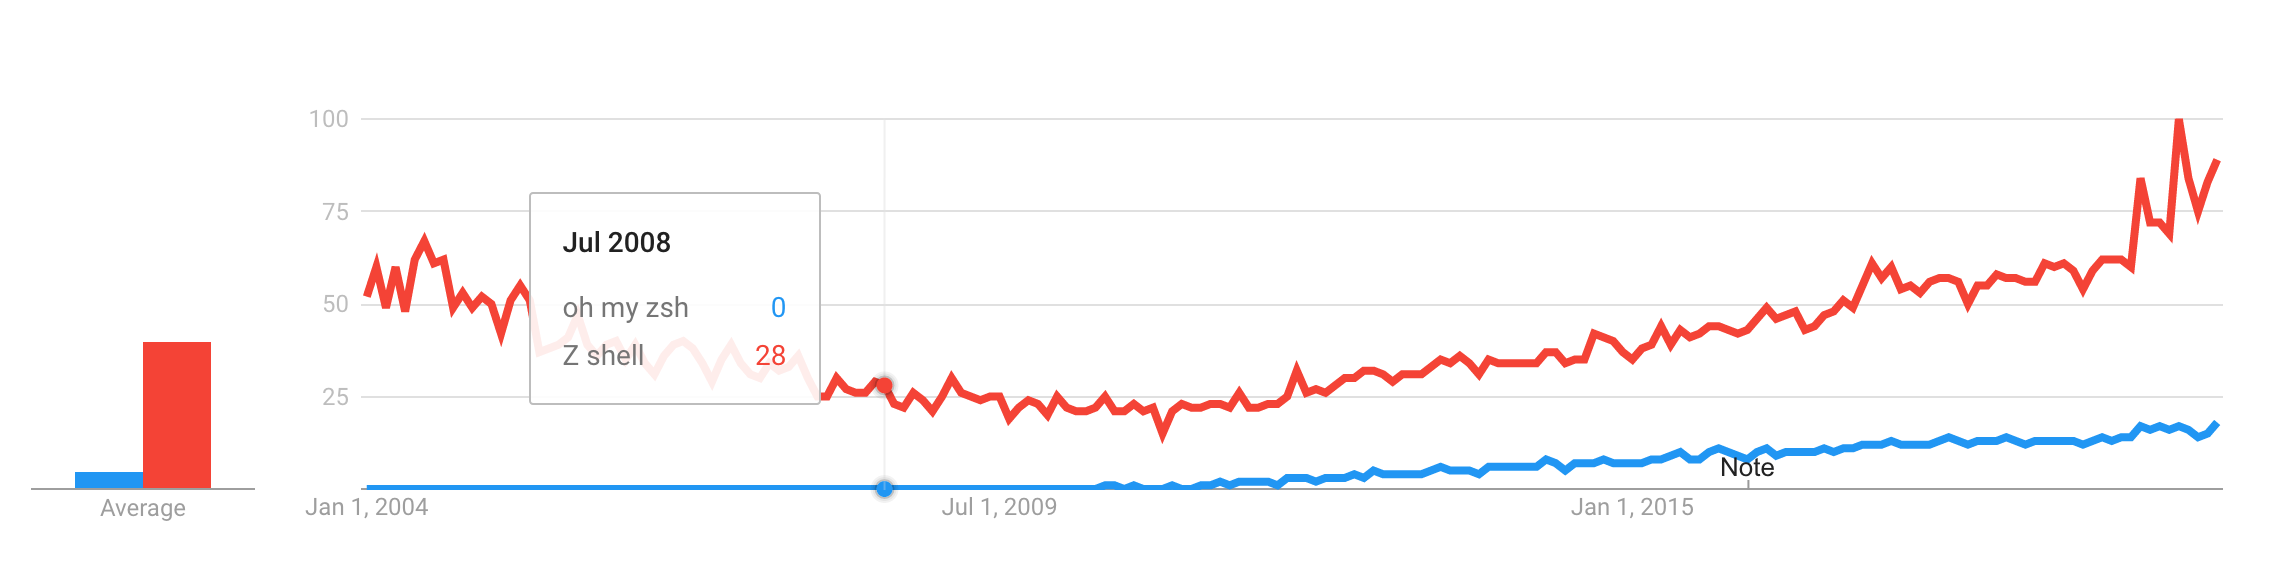 Comparison of Google Trends associated with zsh and Oh My Zsh